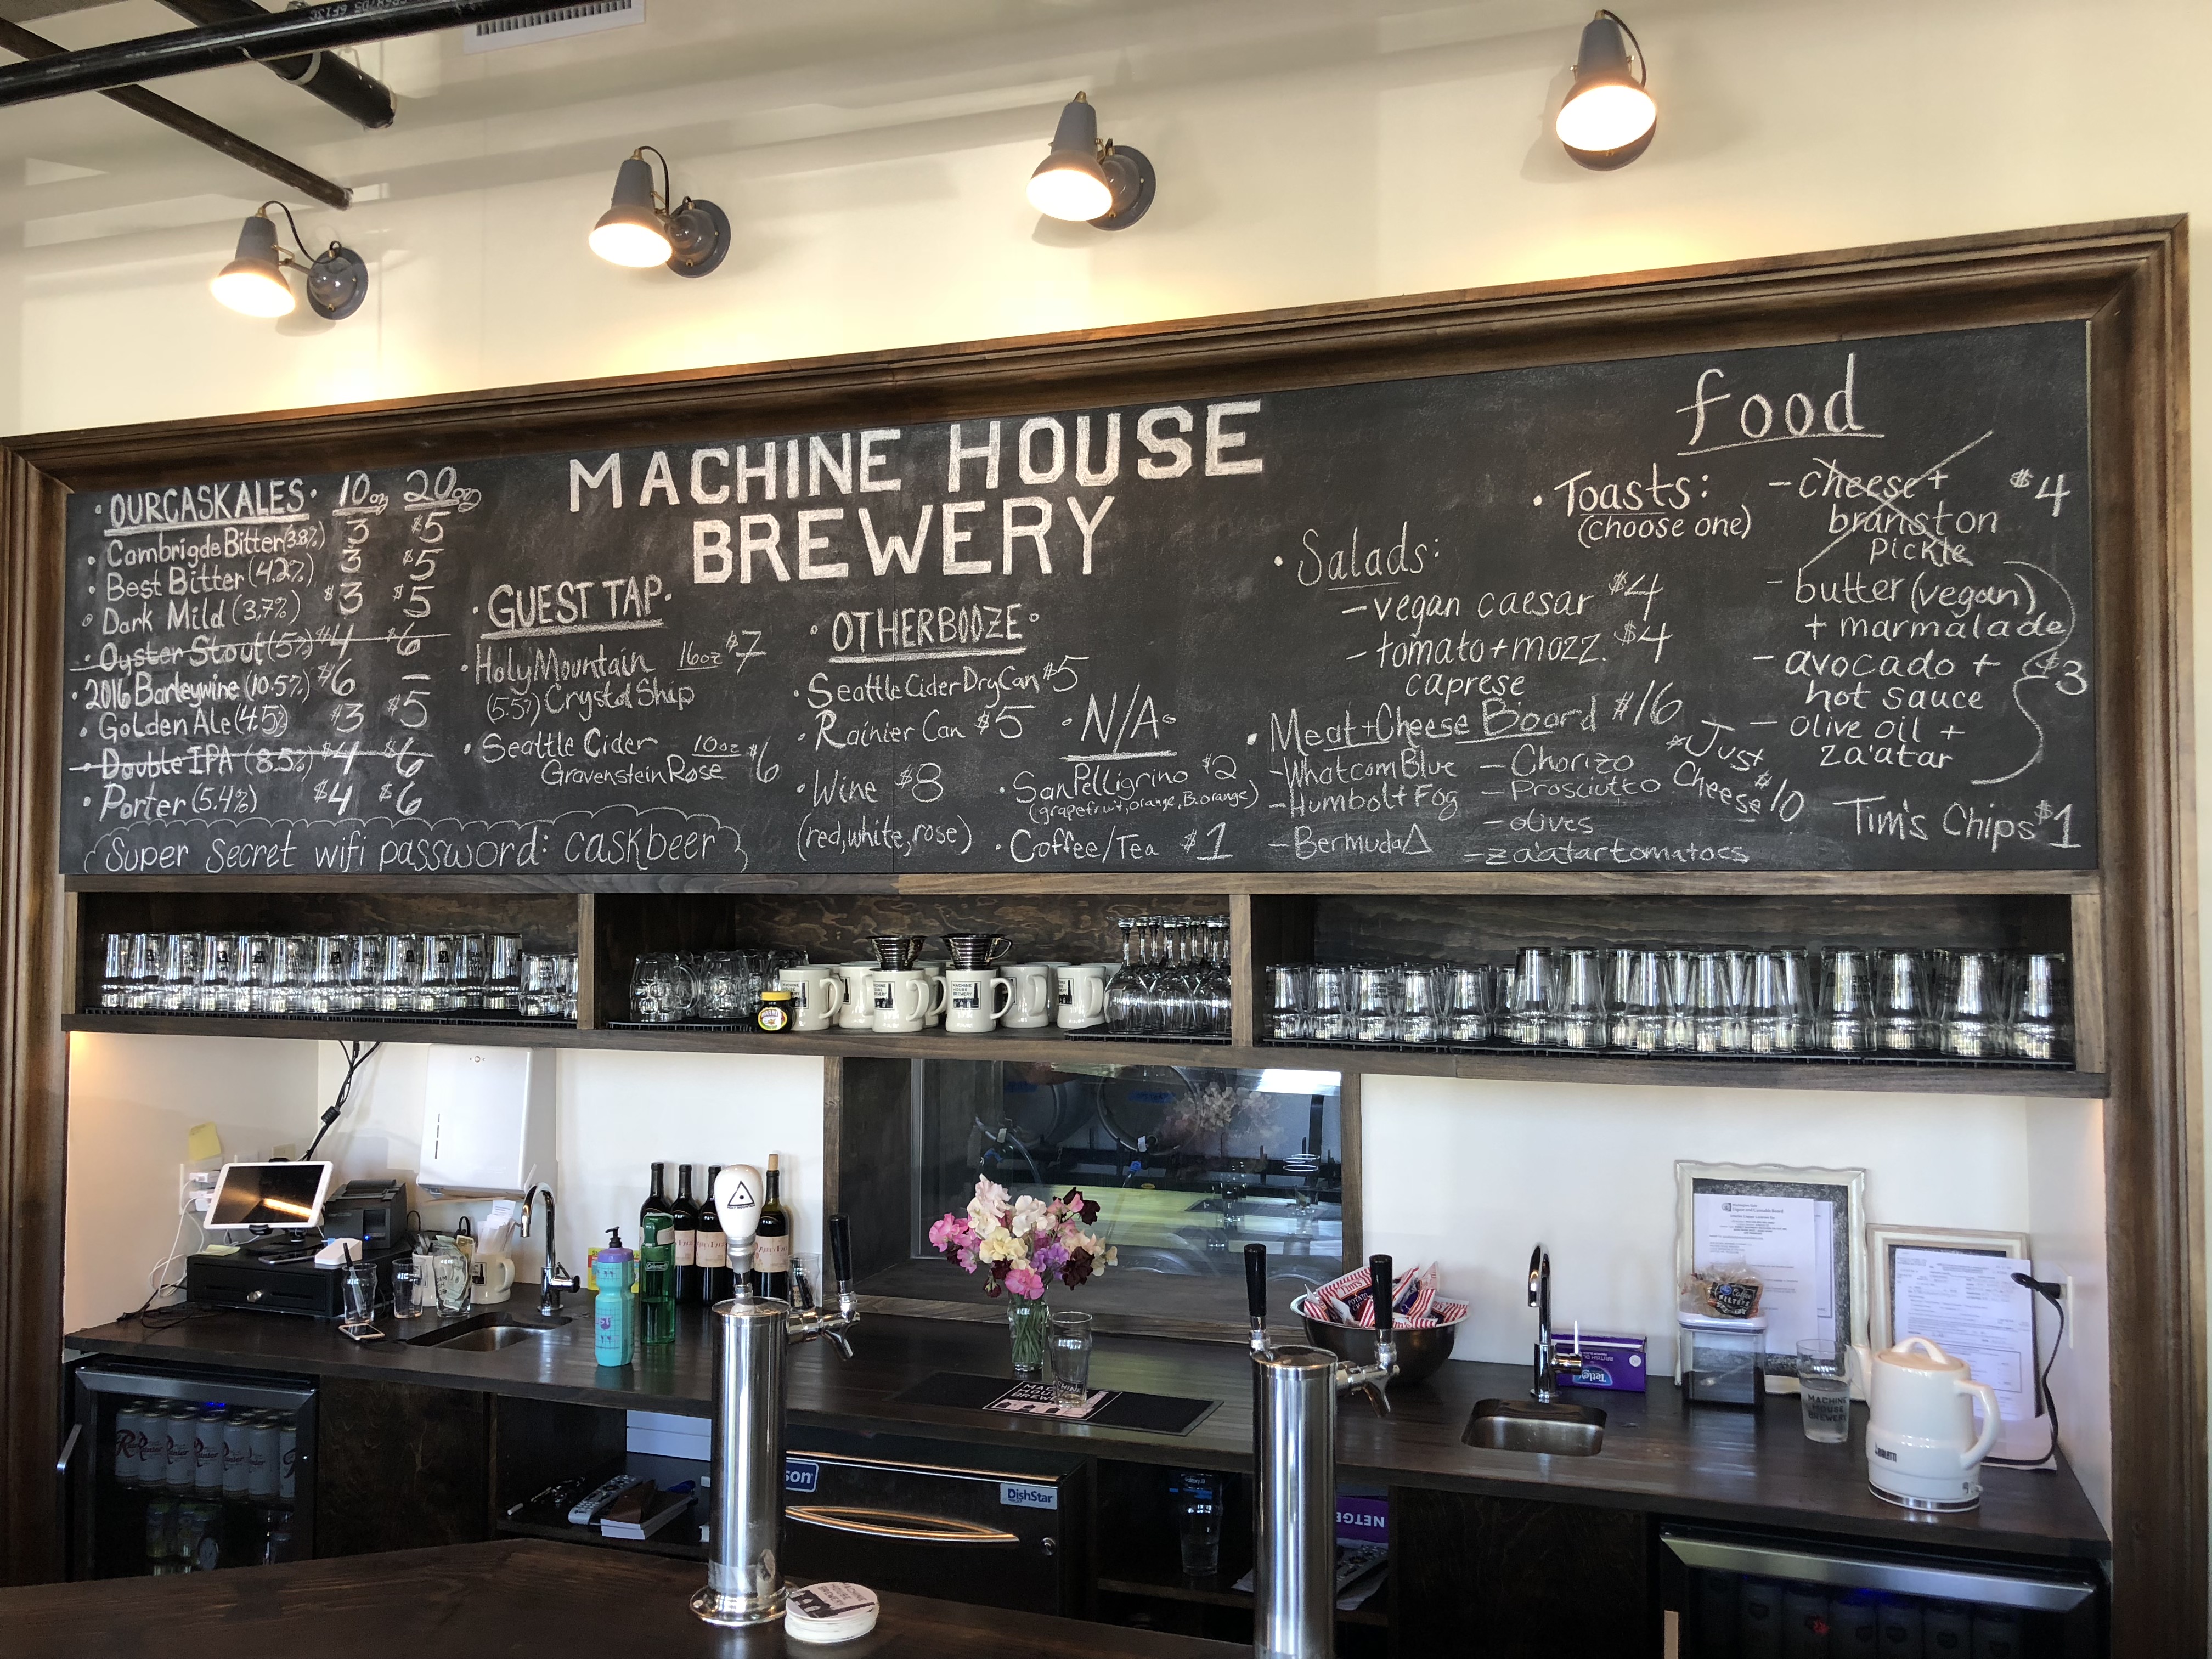 The menu board at Machine House Brewery Central District Taproom.